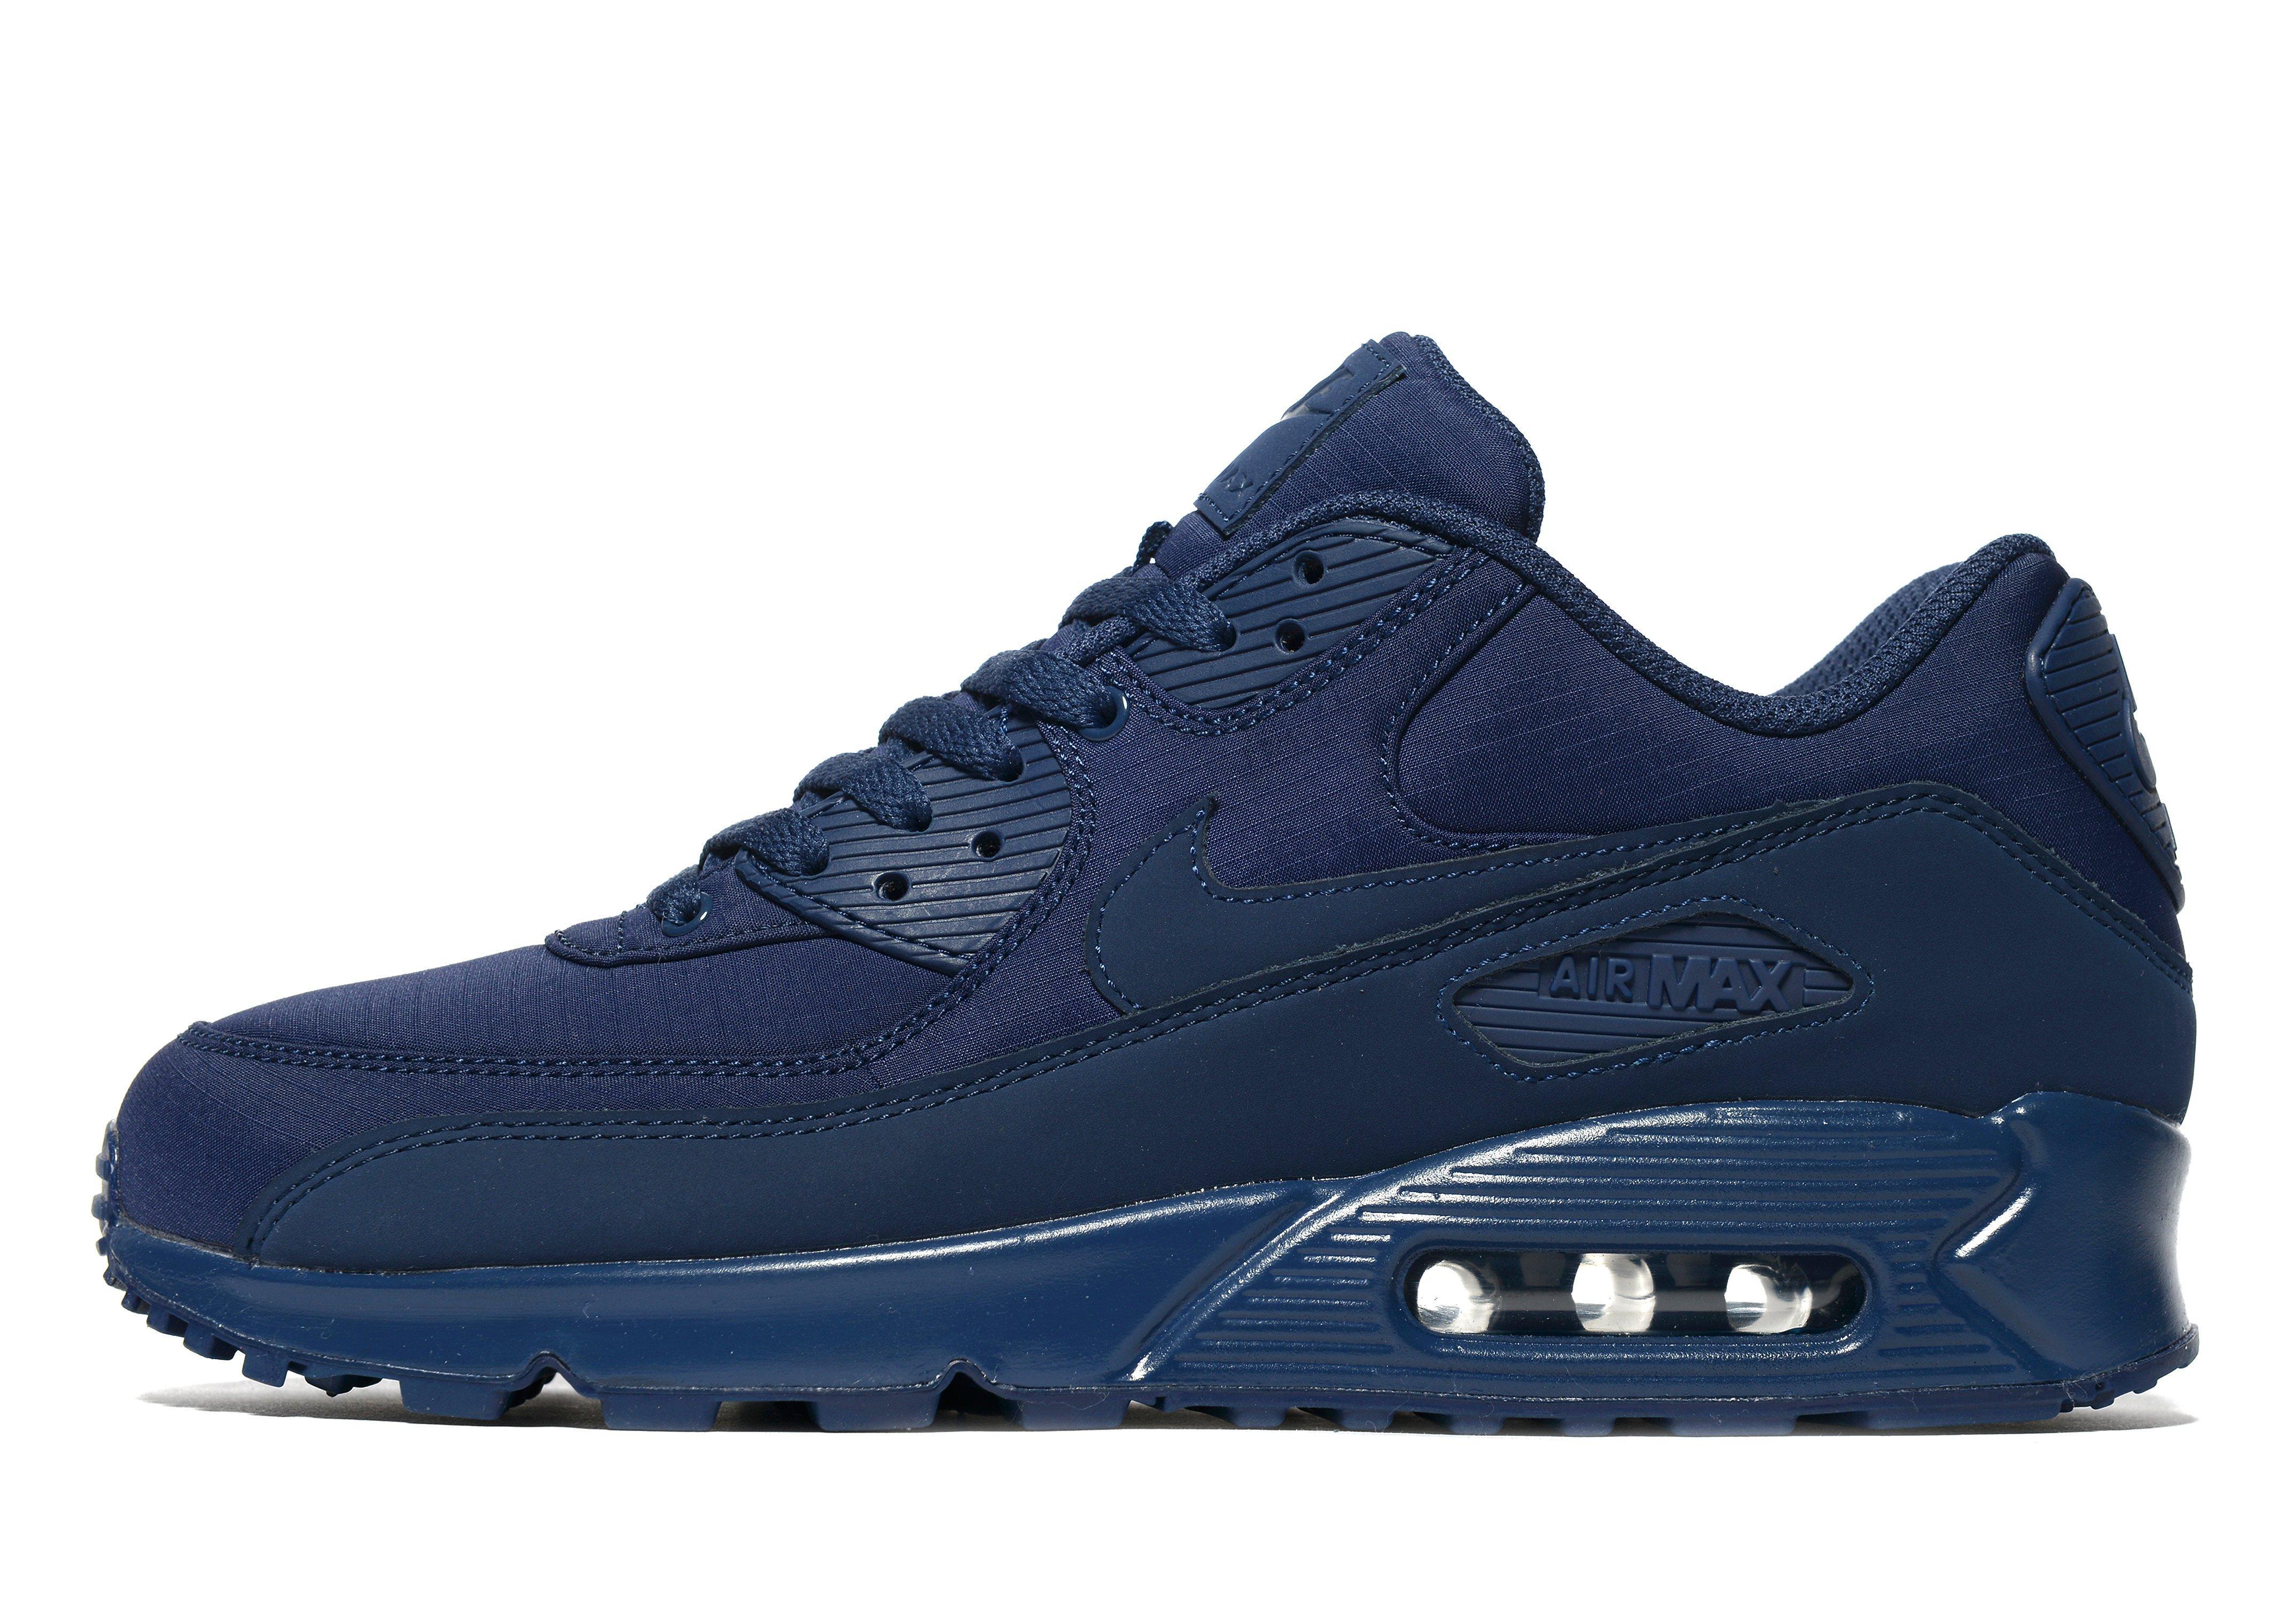 Nike Leather Air Max 90 Ripstop in Navy (Blue) for Men - Lyst